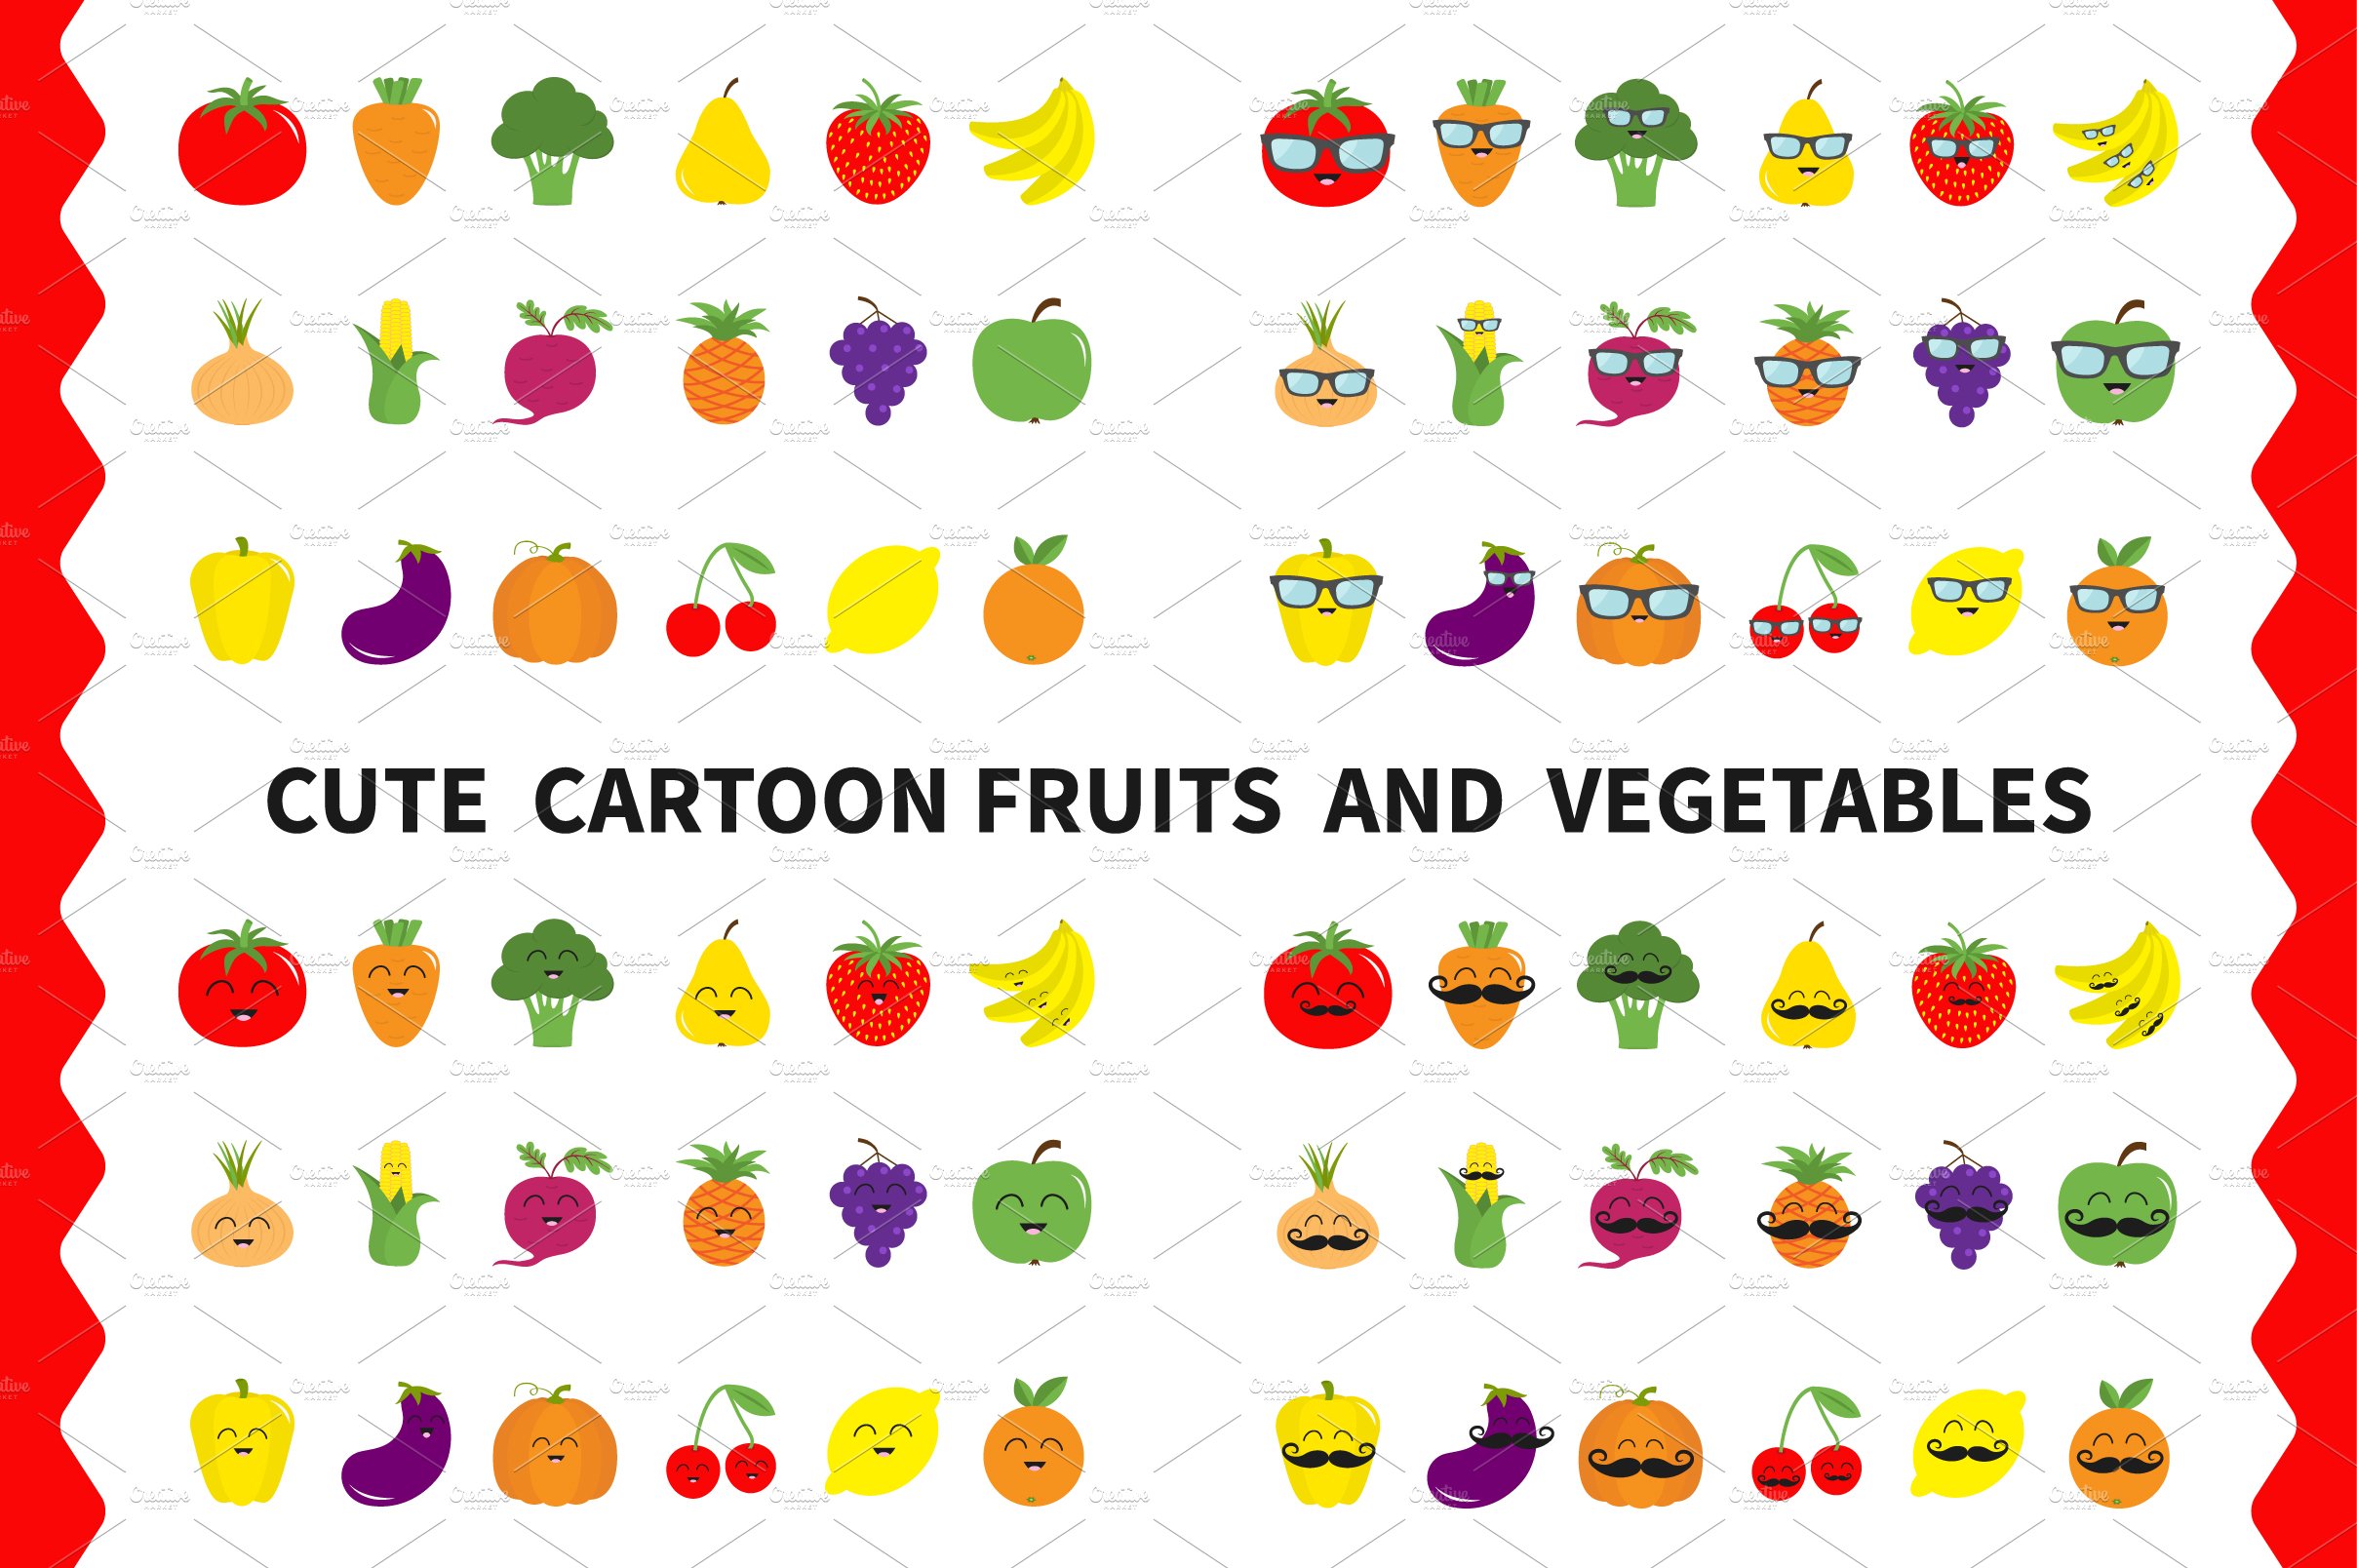 Fruit berry vegetable face icon set cover image.